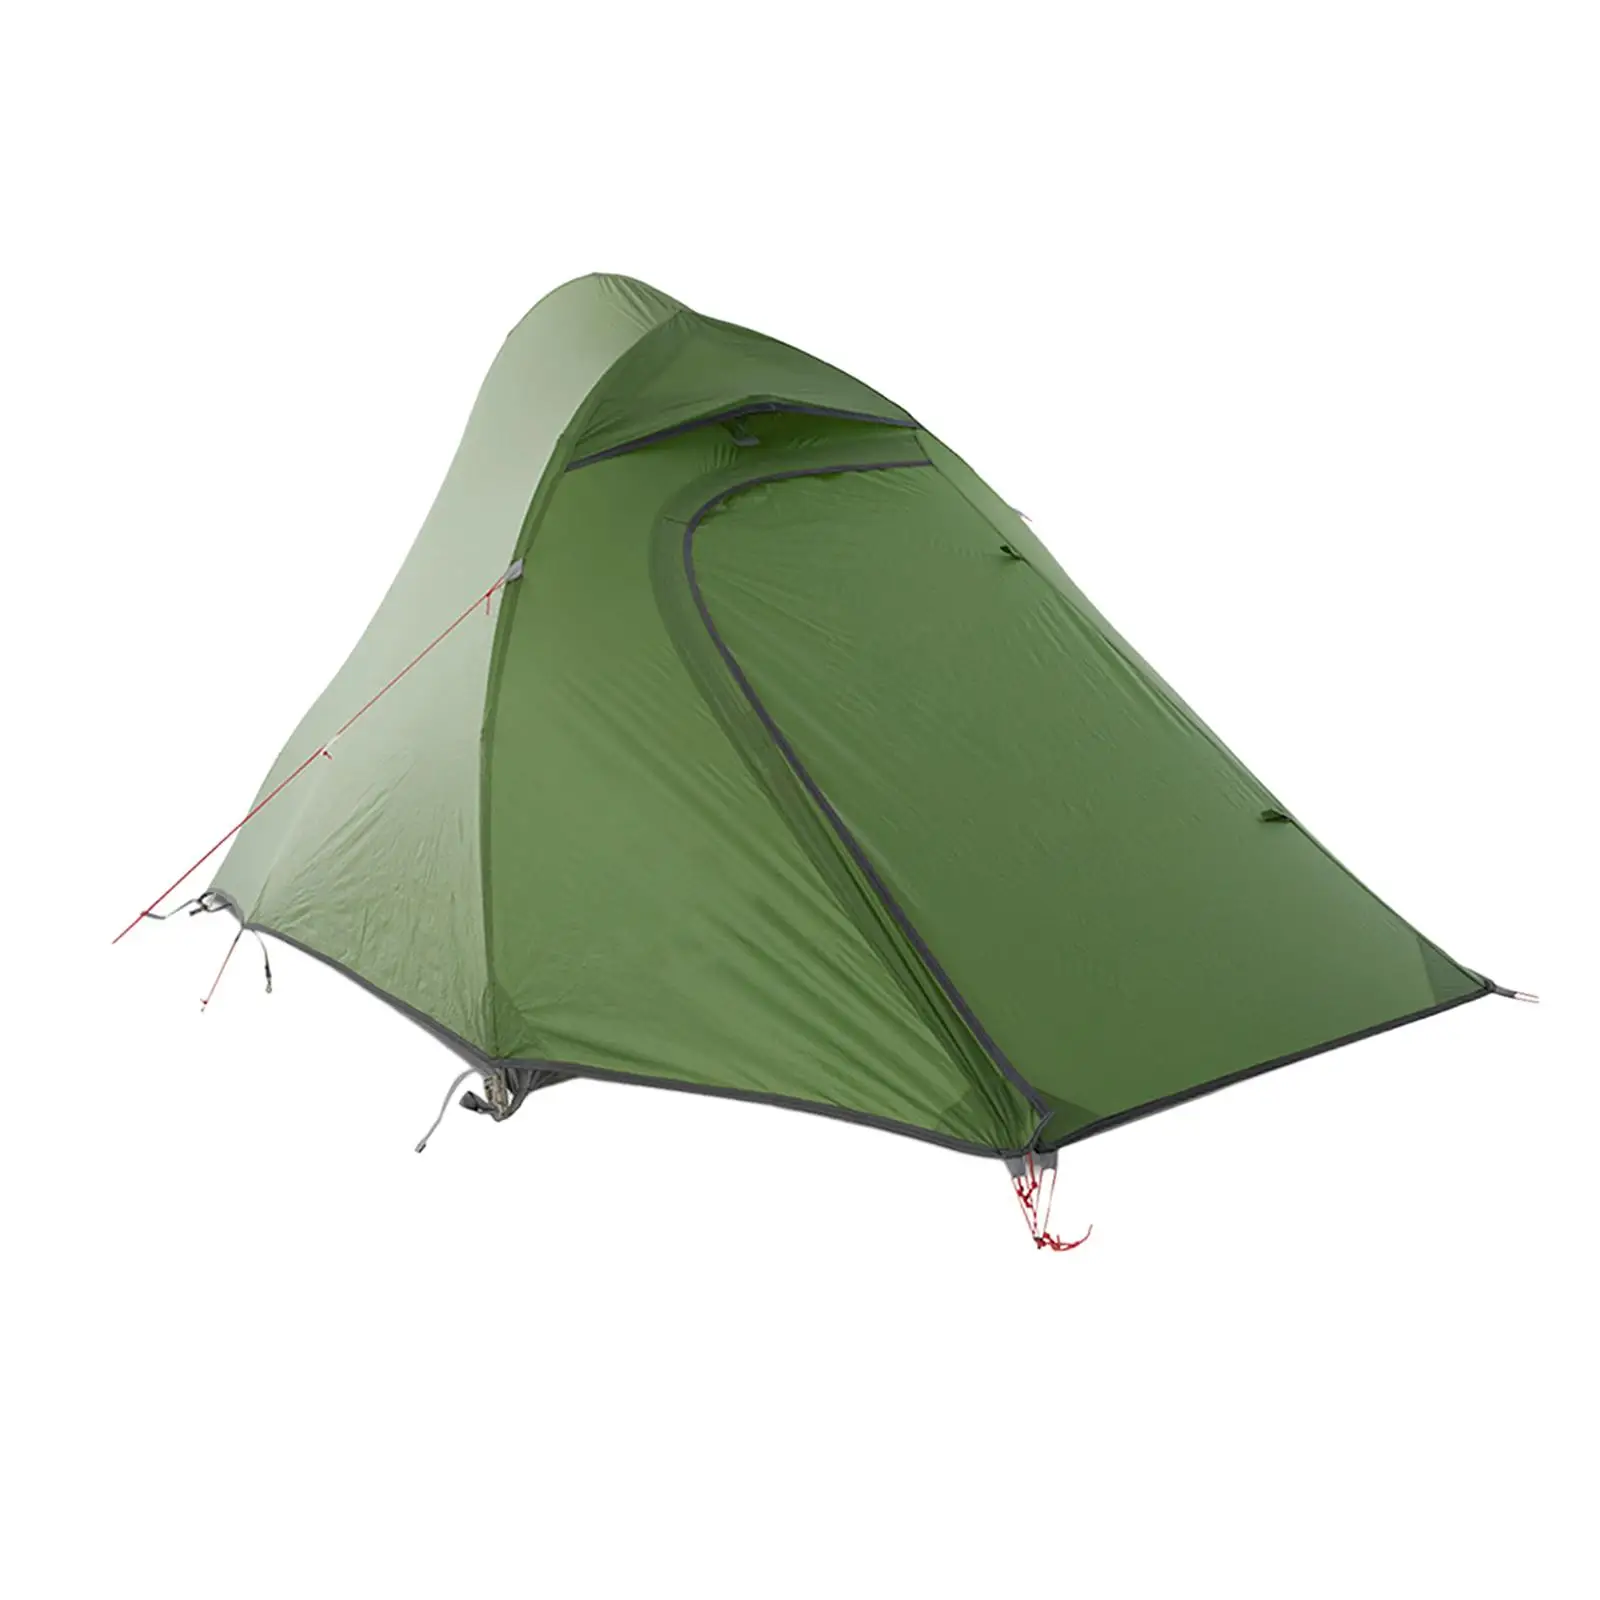 Camping Tent 2 Windows Foldable Heavy Duty with Storage Bag Trekking Tent Backpacking Tent for Travel Picnic Garden Fishing